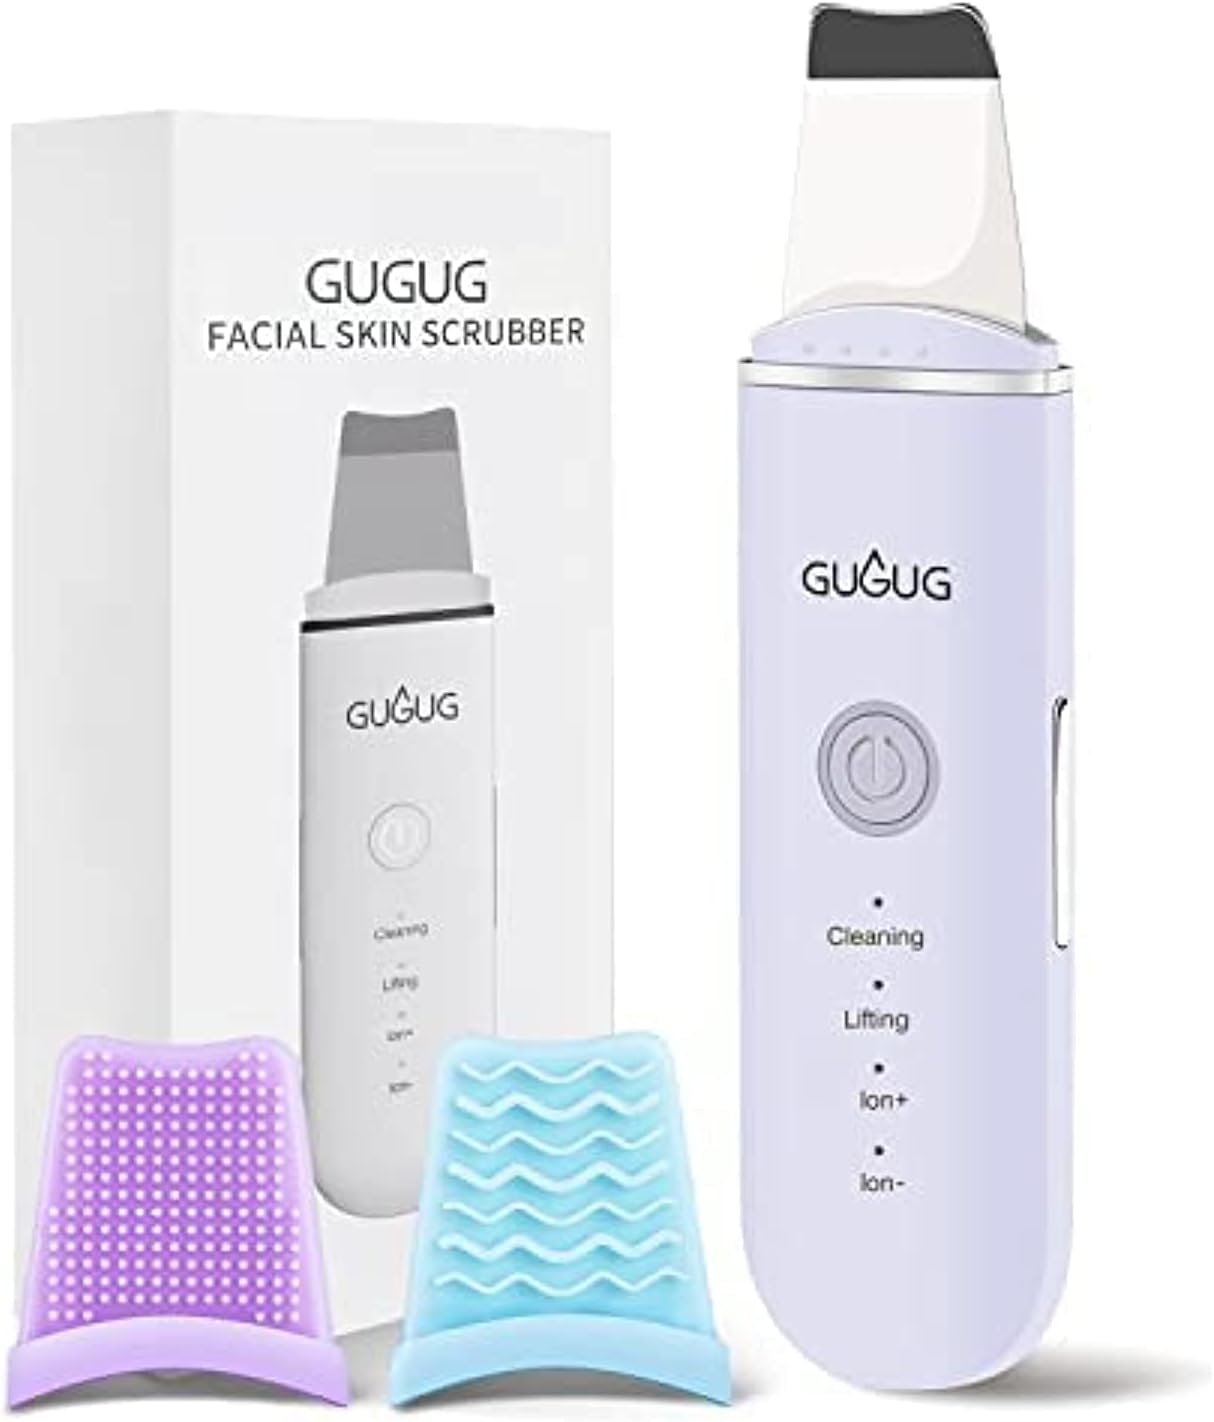 GUGUG Skin Scrubber Face Spatula, Skin Spatula Pore Cleaner Blackhead Remover Tools for Facial Deep Cleansing-4 Modes, Purple